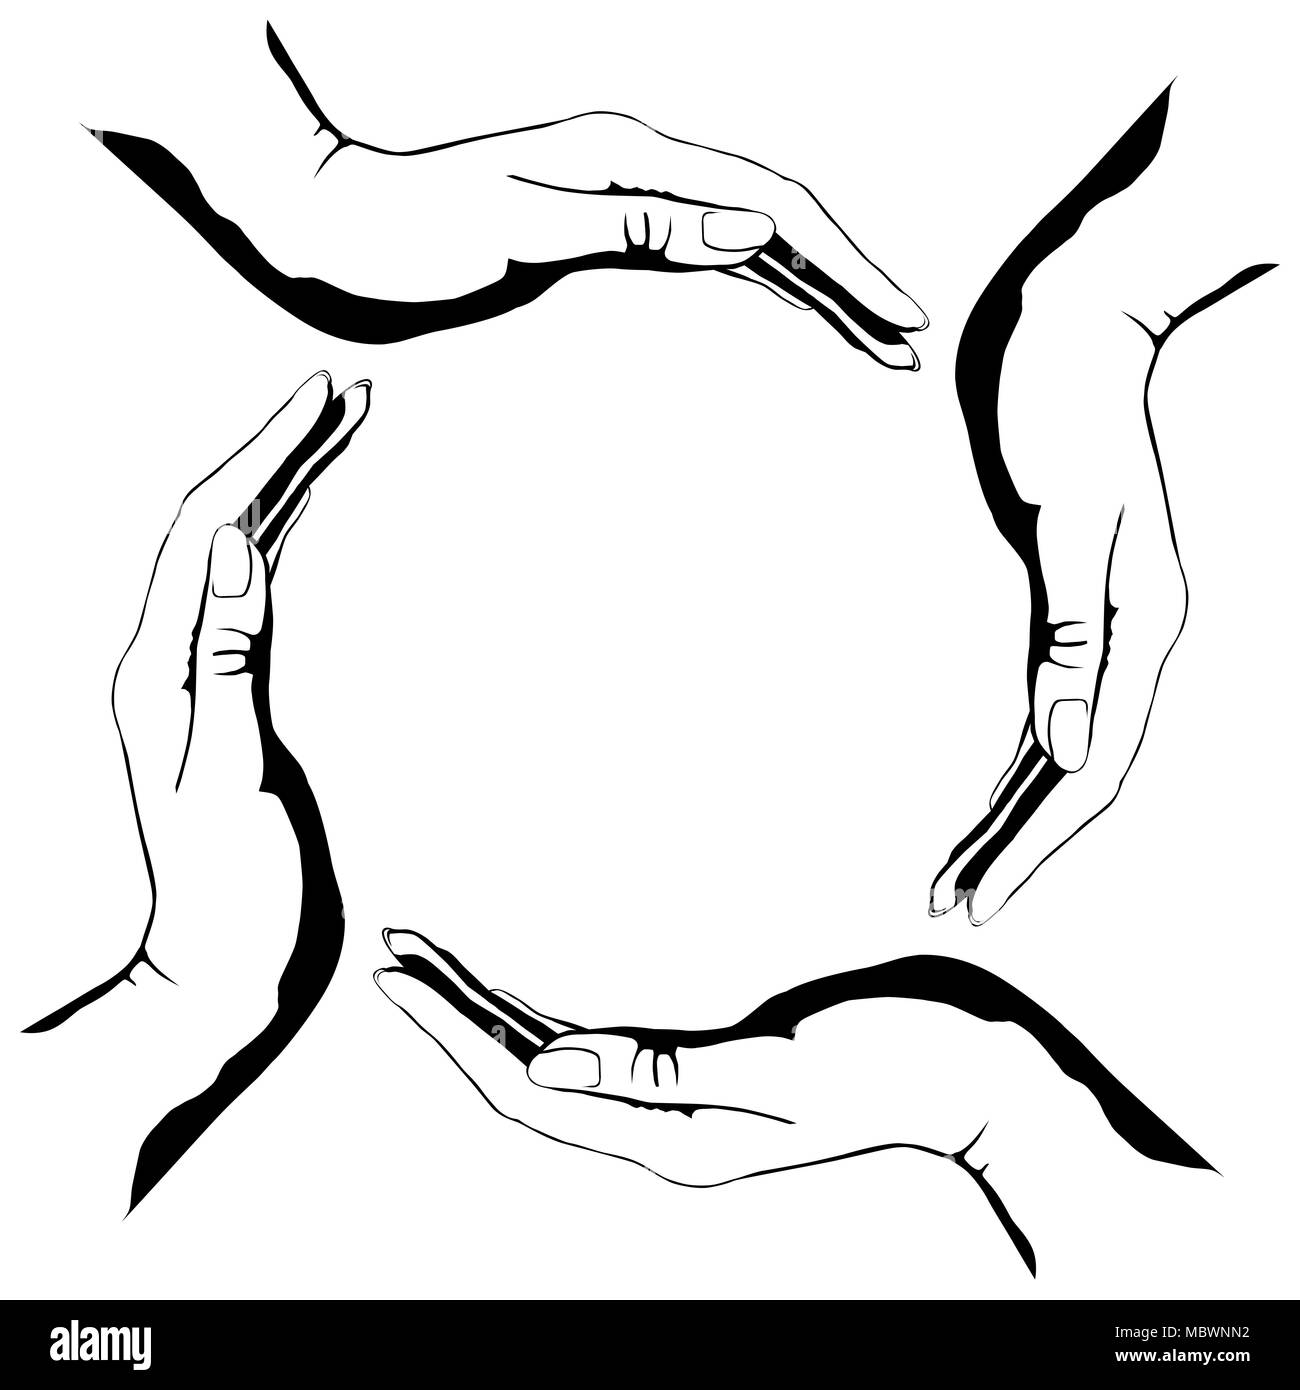 Four people hands making circle conceptual round symbol isolated illustration on white background Stock Photo